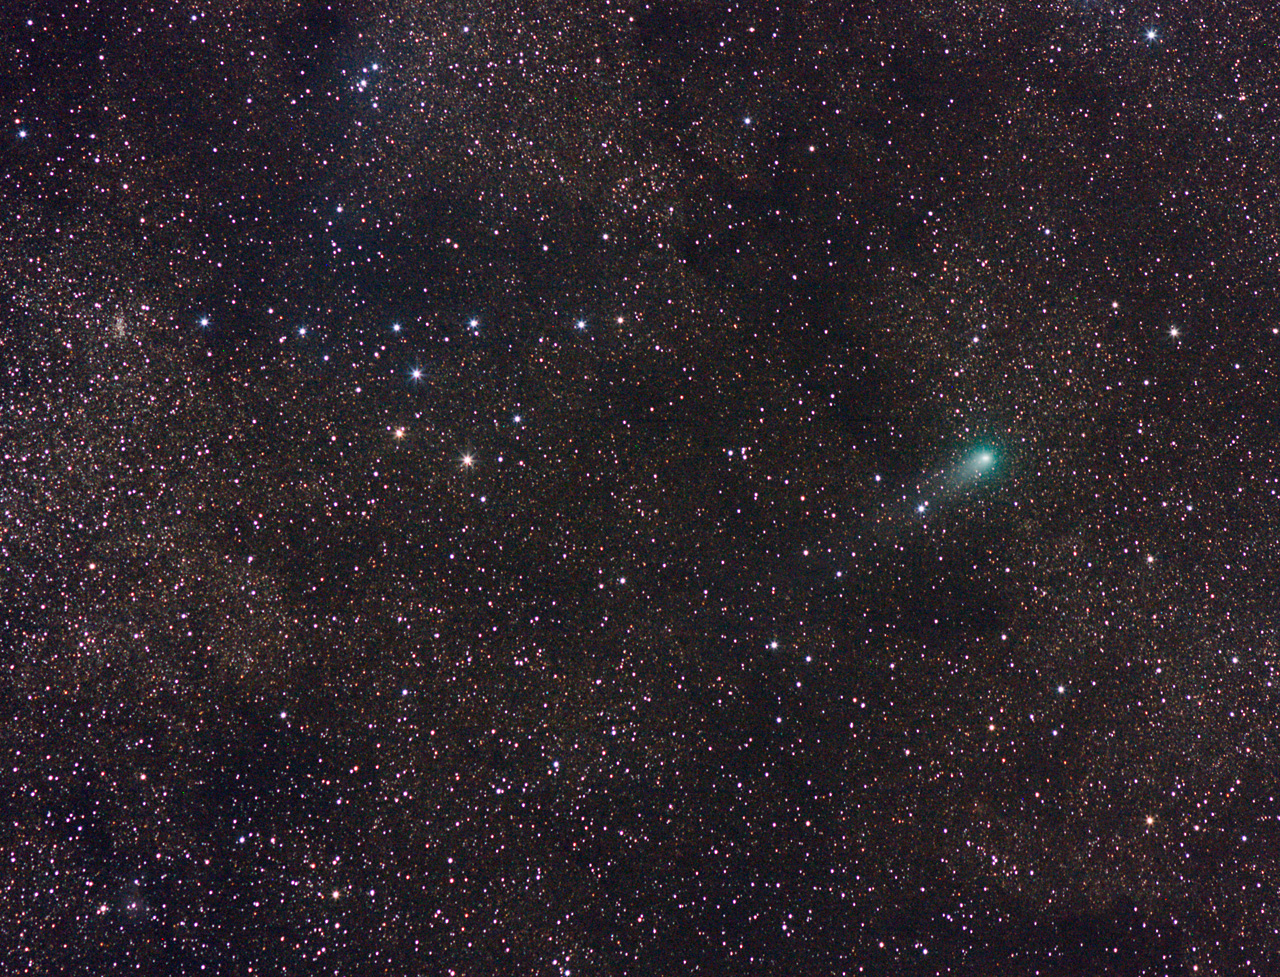 Photograph of Comet